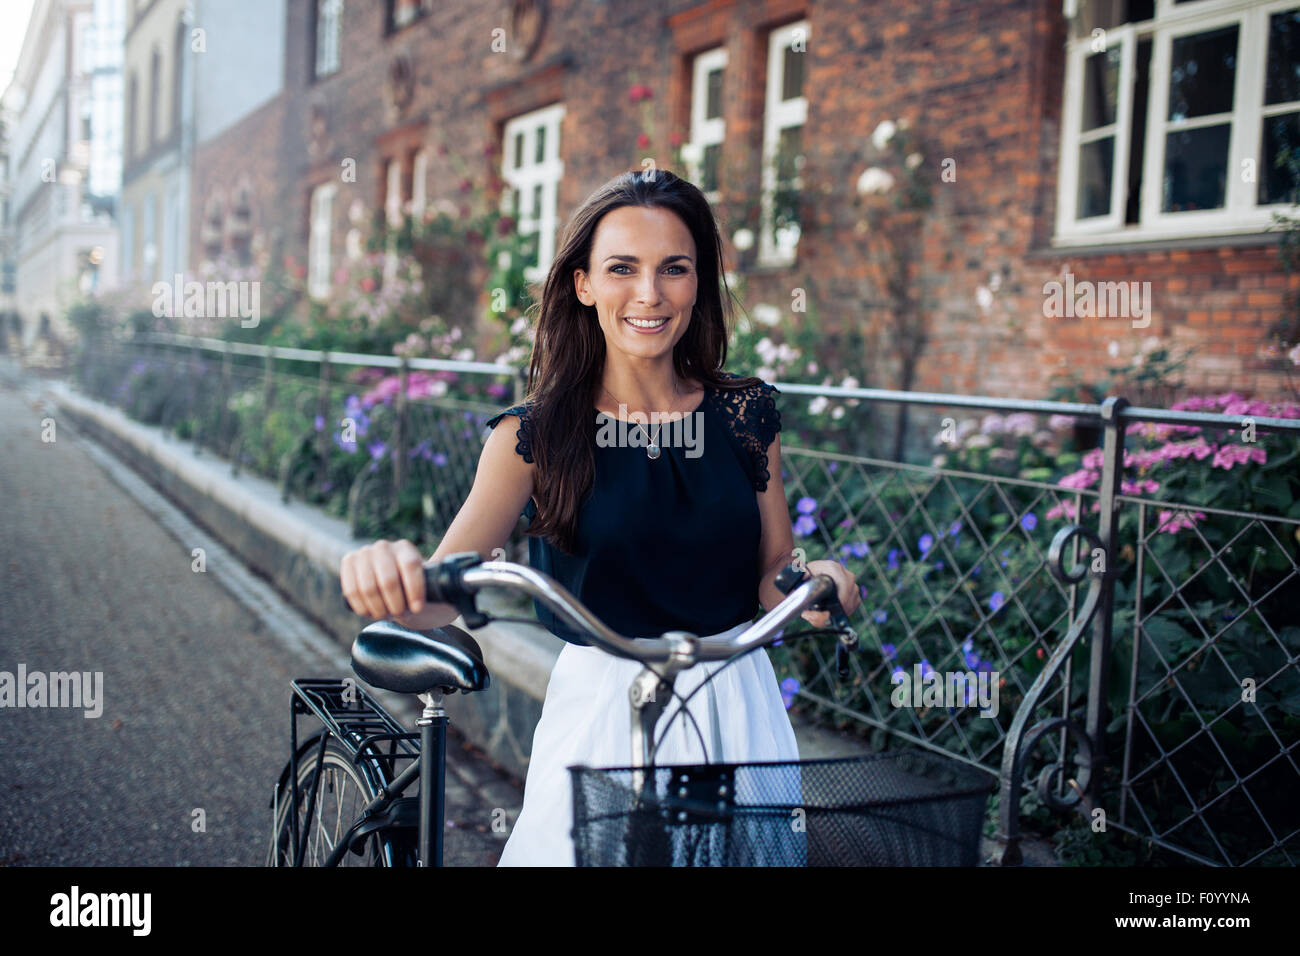 Belle femme avec un cycle walking down the city road. Caucasian female smiling and looking at camera. Banque D'Images